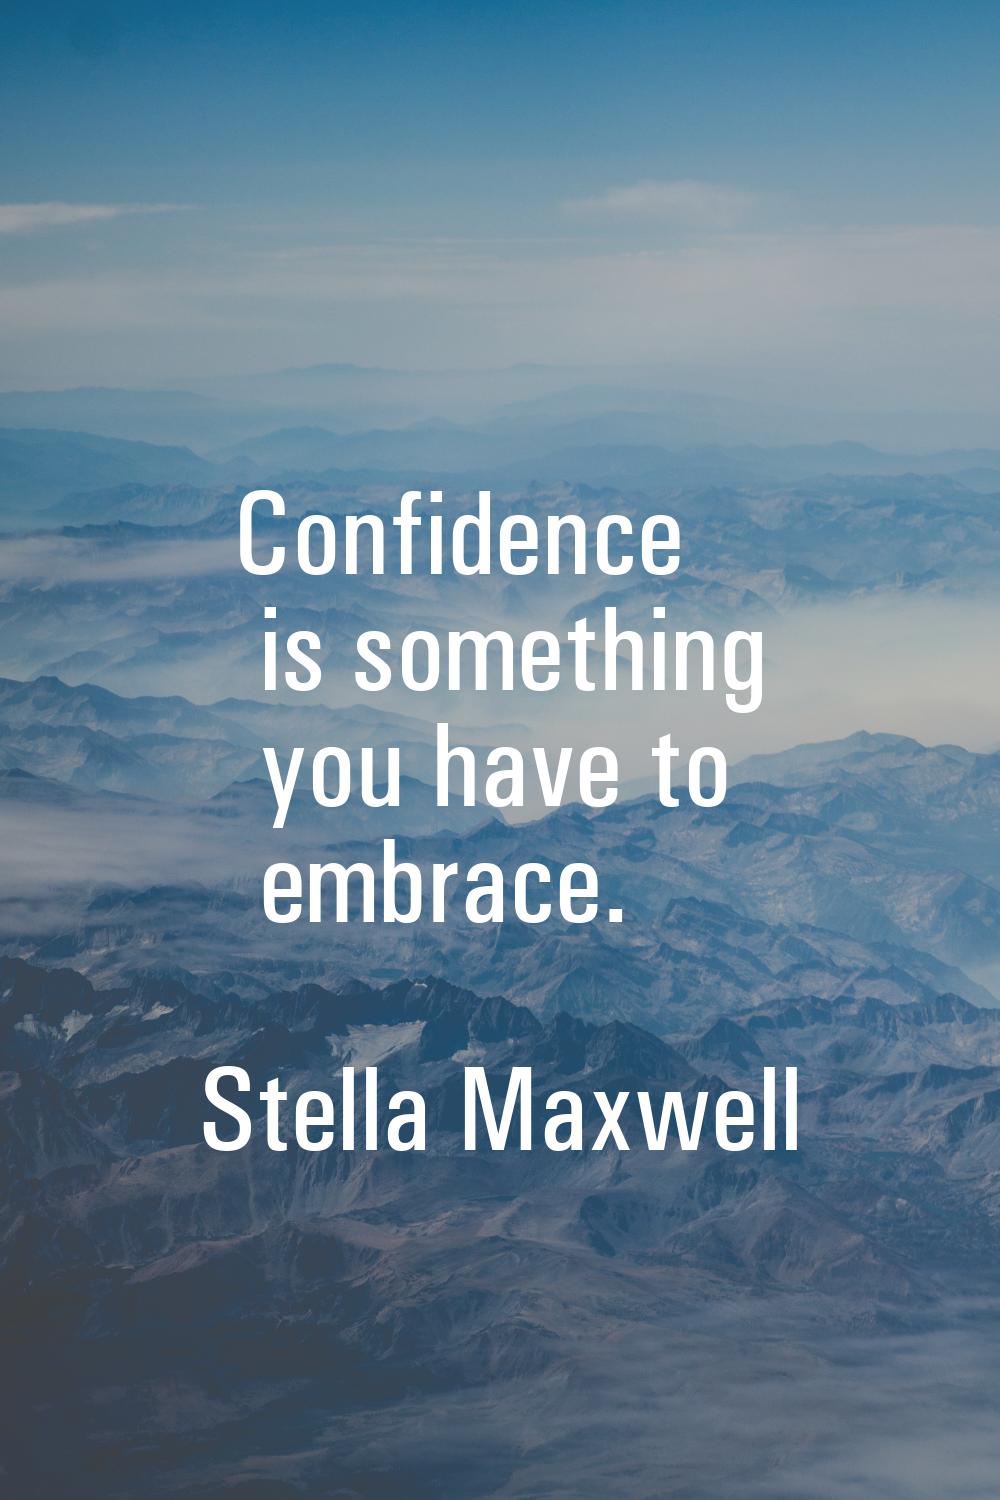 Confidence is something you have to embrace.